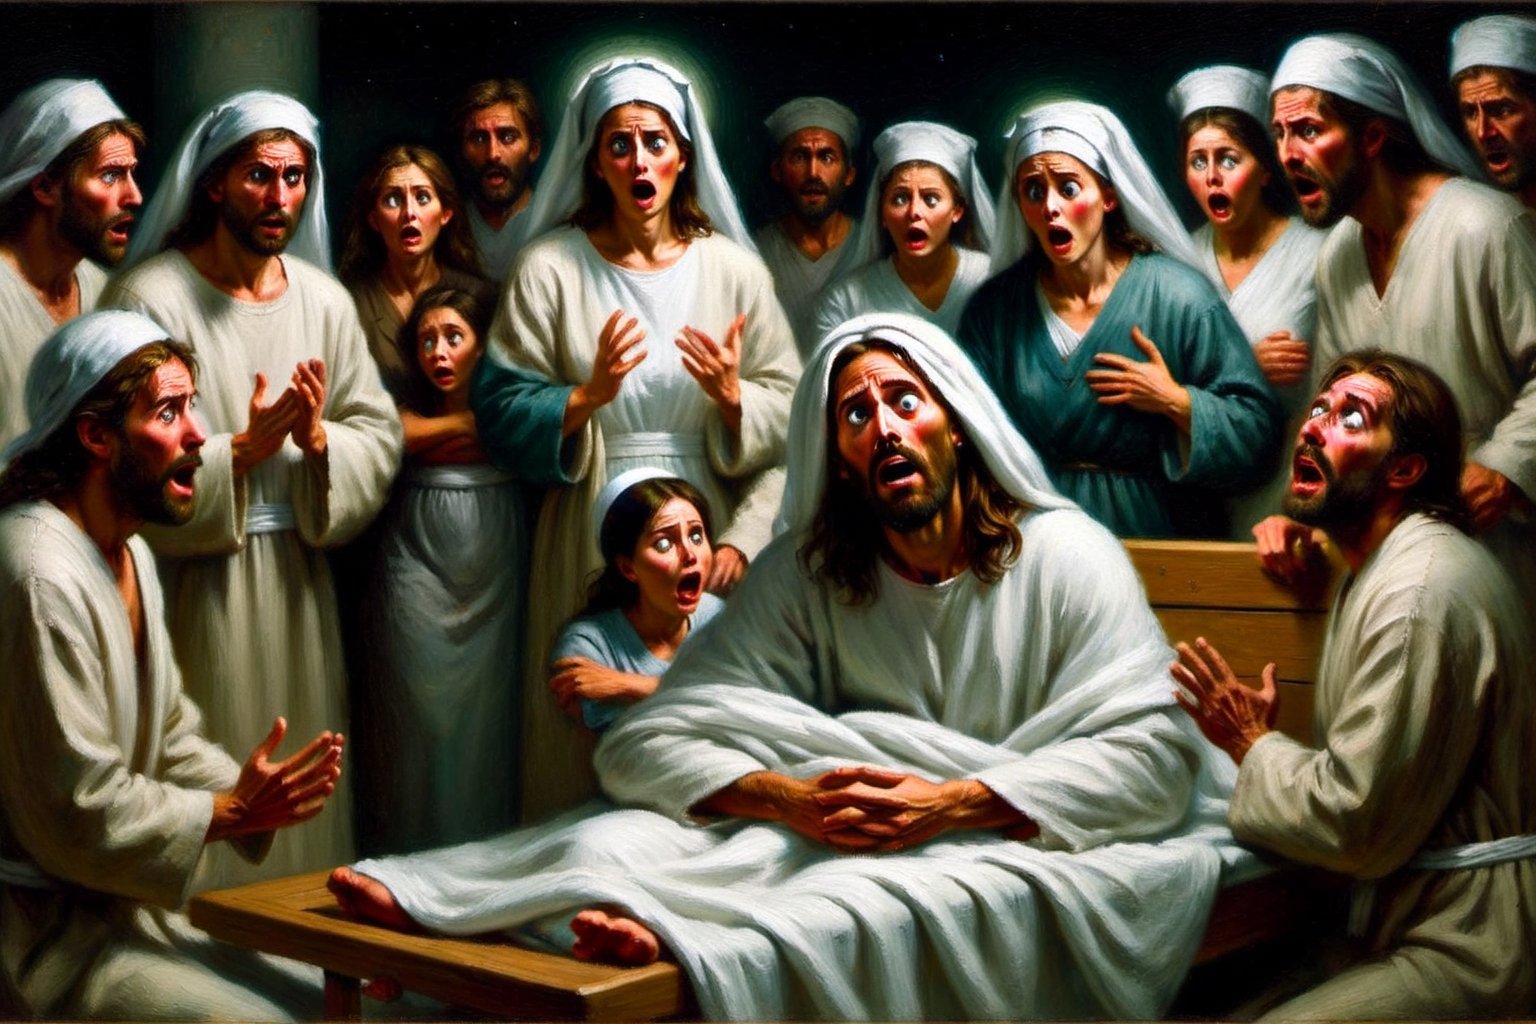 Jesus, wrapped in white linen, sitting up abruptly in a dimly lit hospital. His eyes are wide with surprise as those around him, doctor and nurses, with shocked and horrified expressions,oil painting